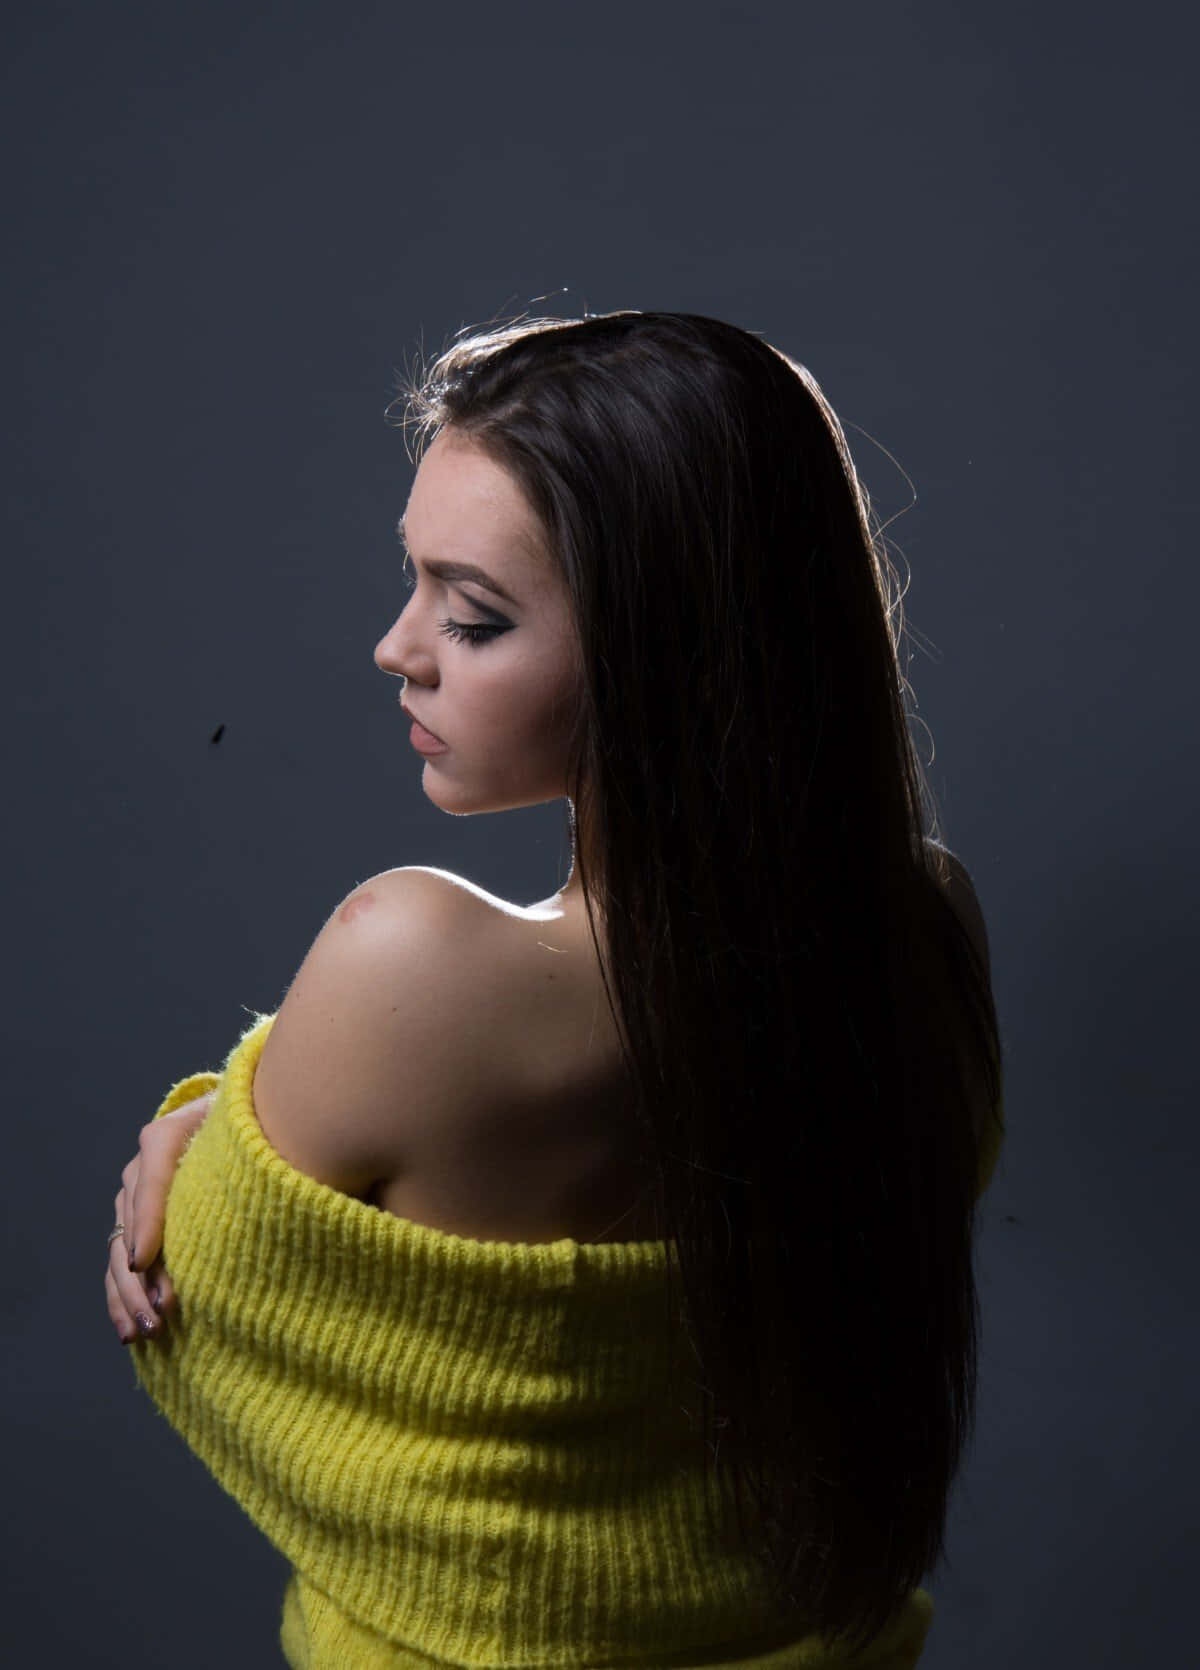 A Woman In A Yellow Sweater Posing On A Grey Background